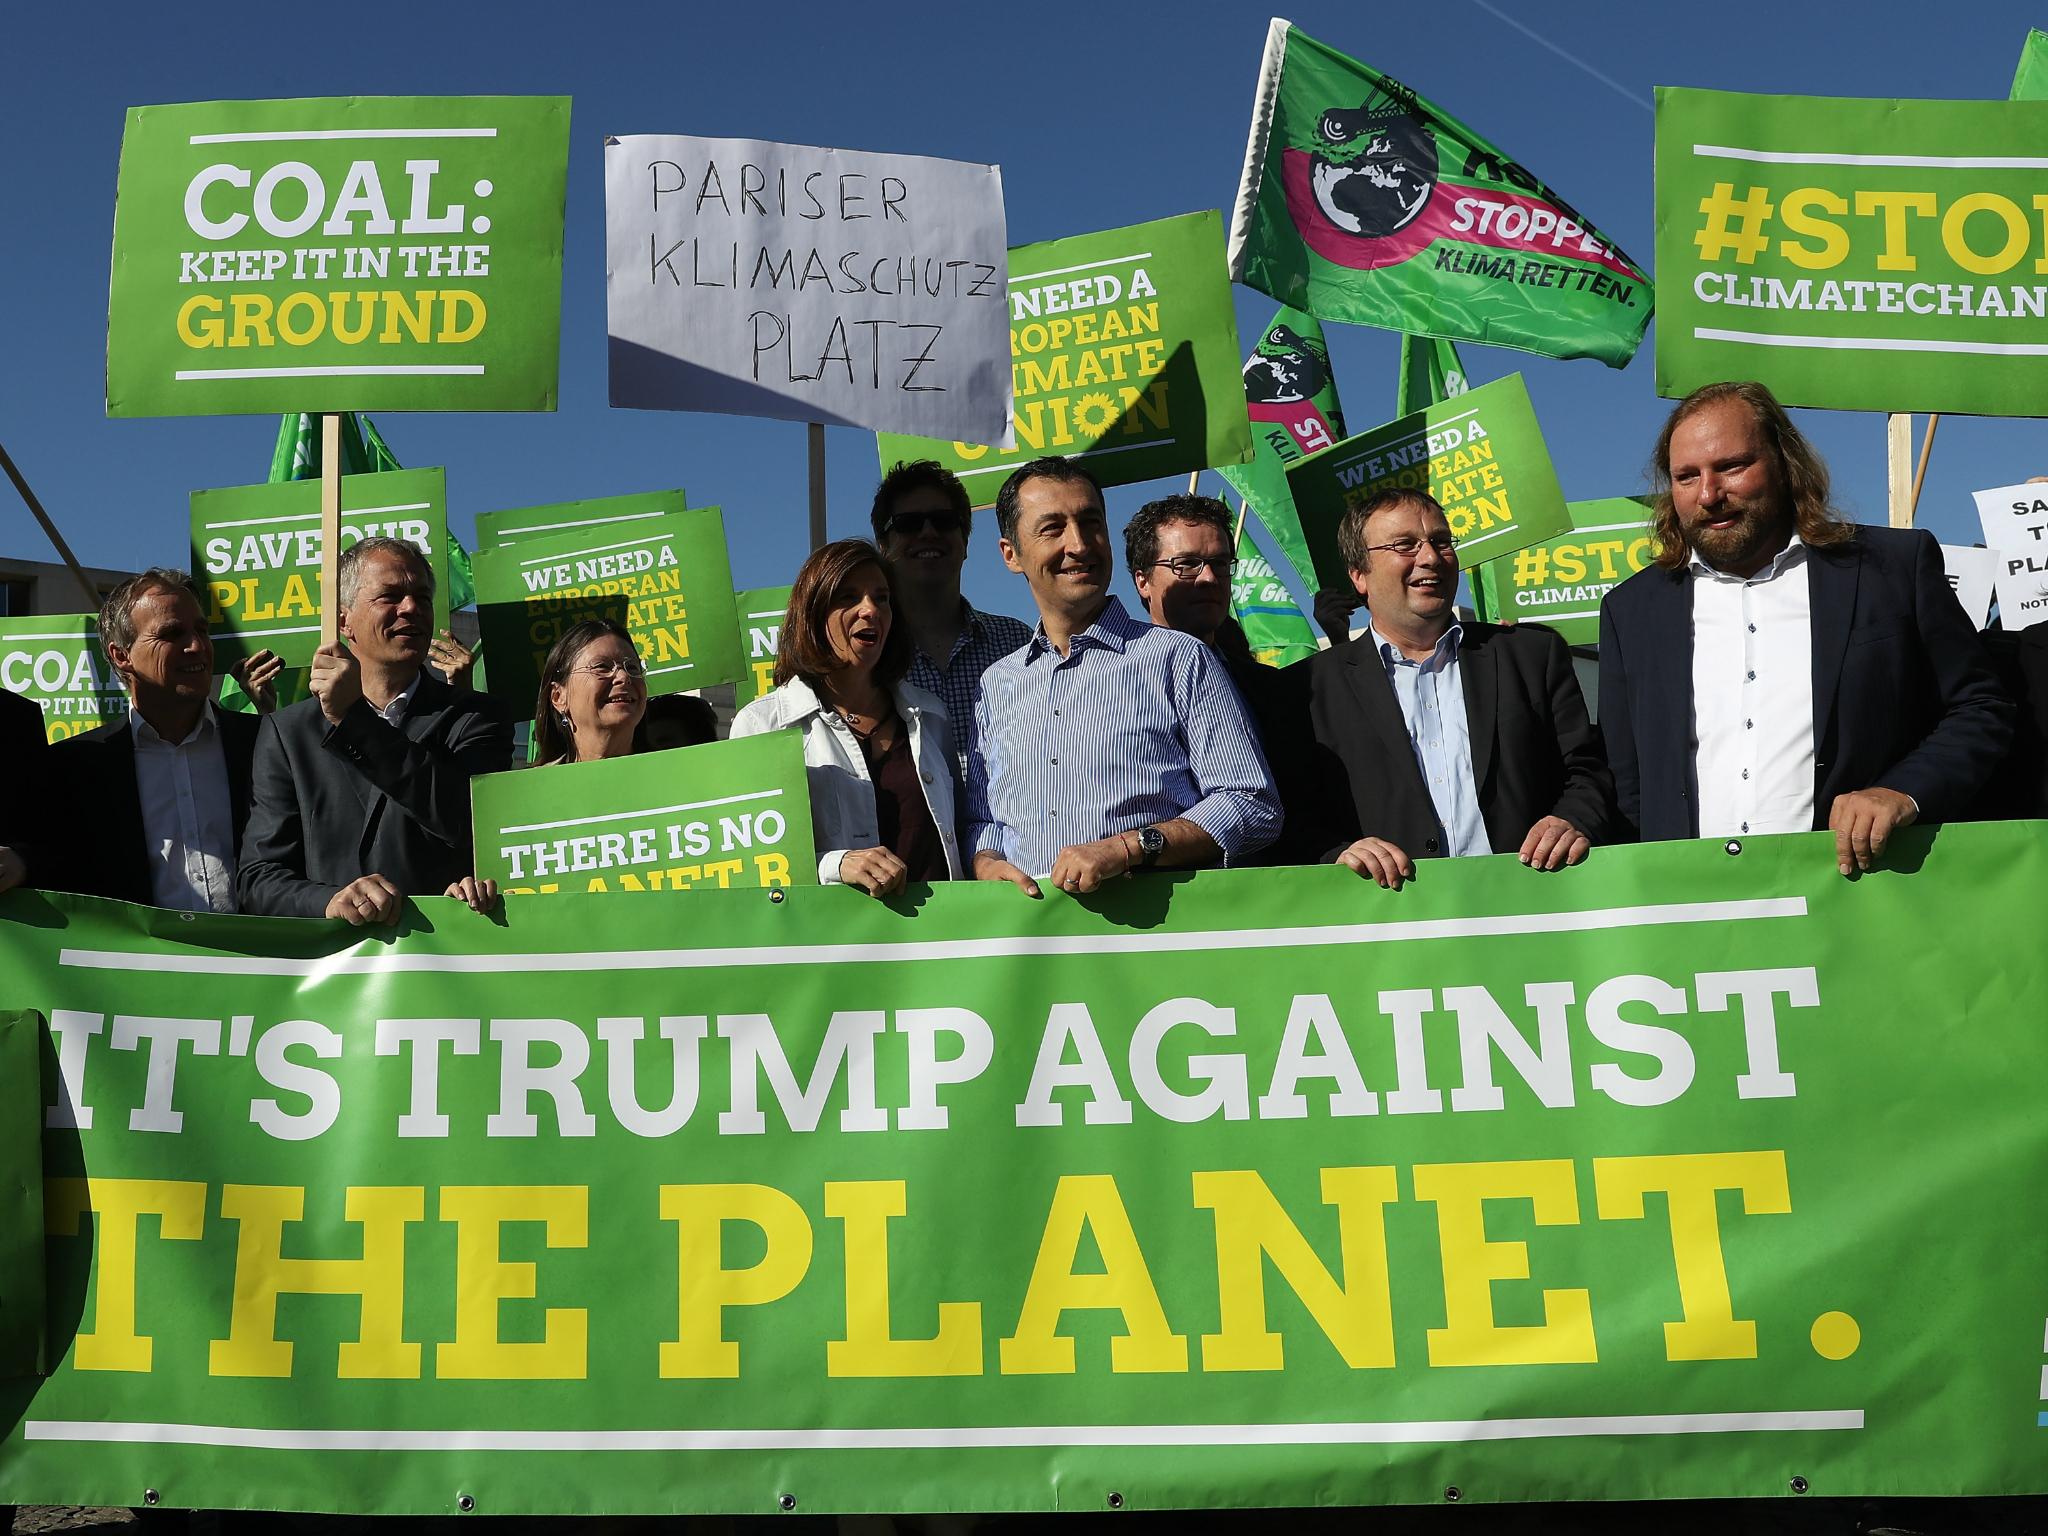 Members of the Green Party in Germany protest Donald Trump's withdrawal of the US from the Paris Agreement on climate change outside of the US Embassy in Berlin on 2 June 2017